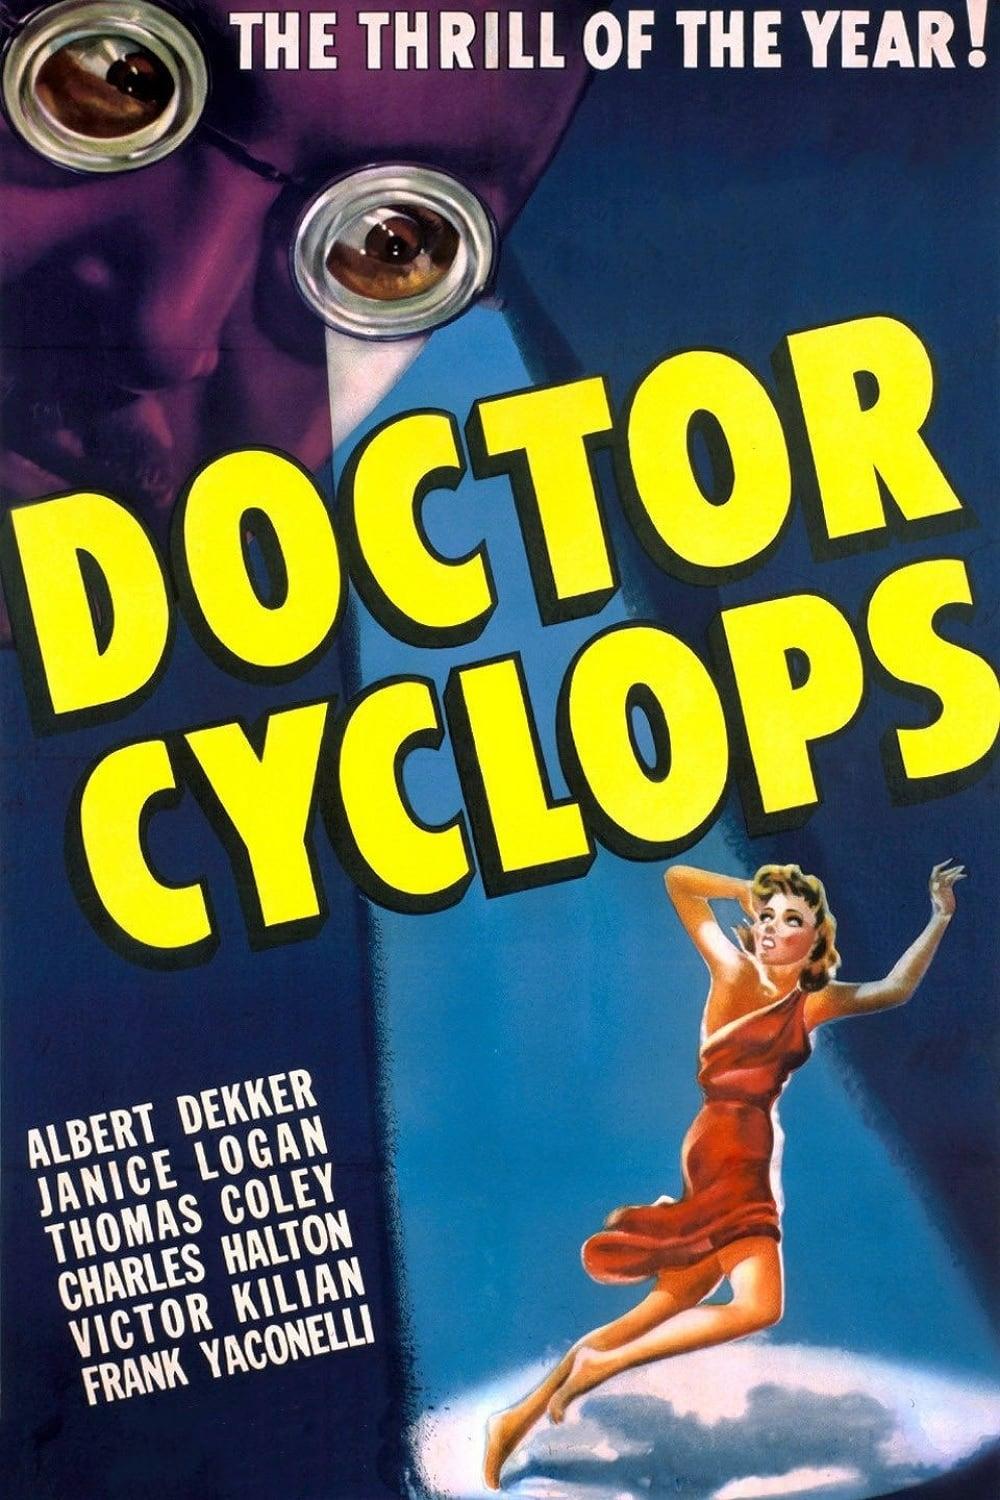 Dr. Zyklop poster